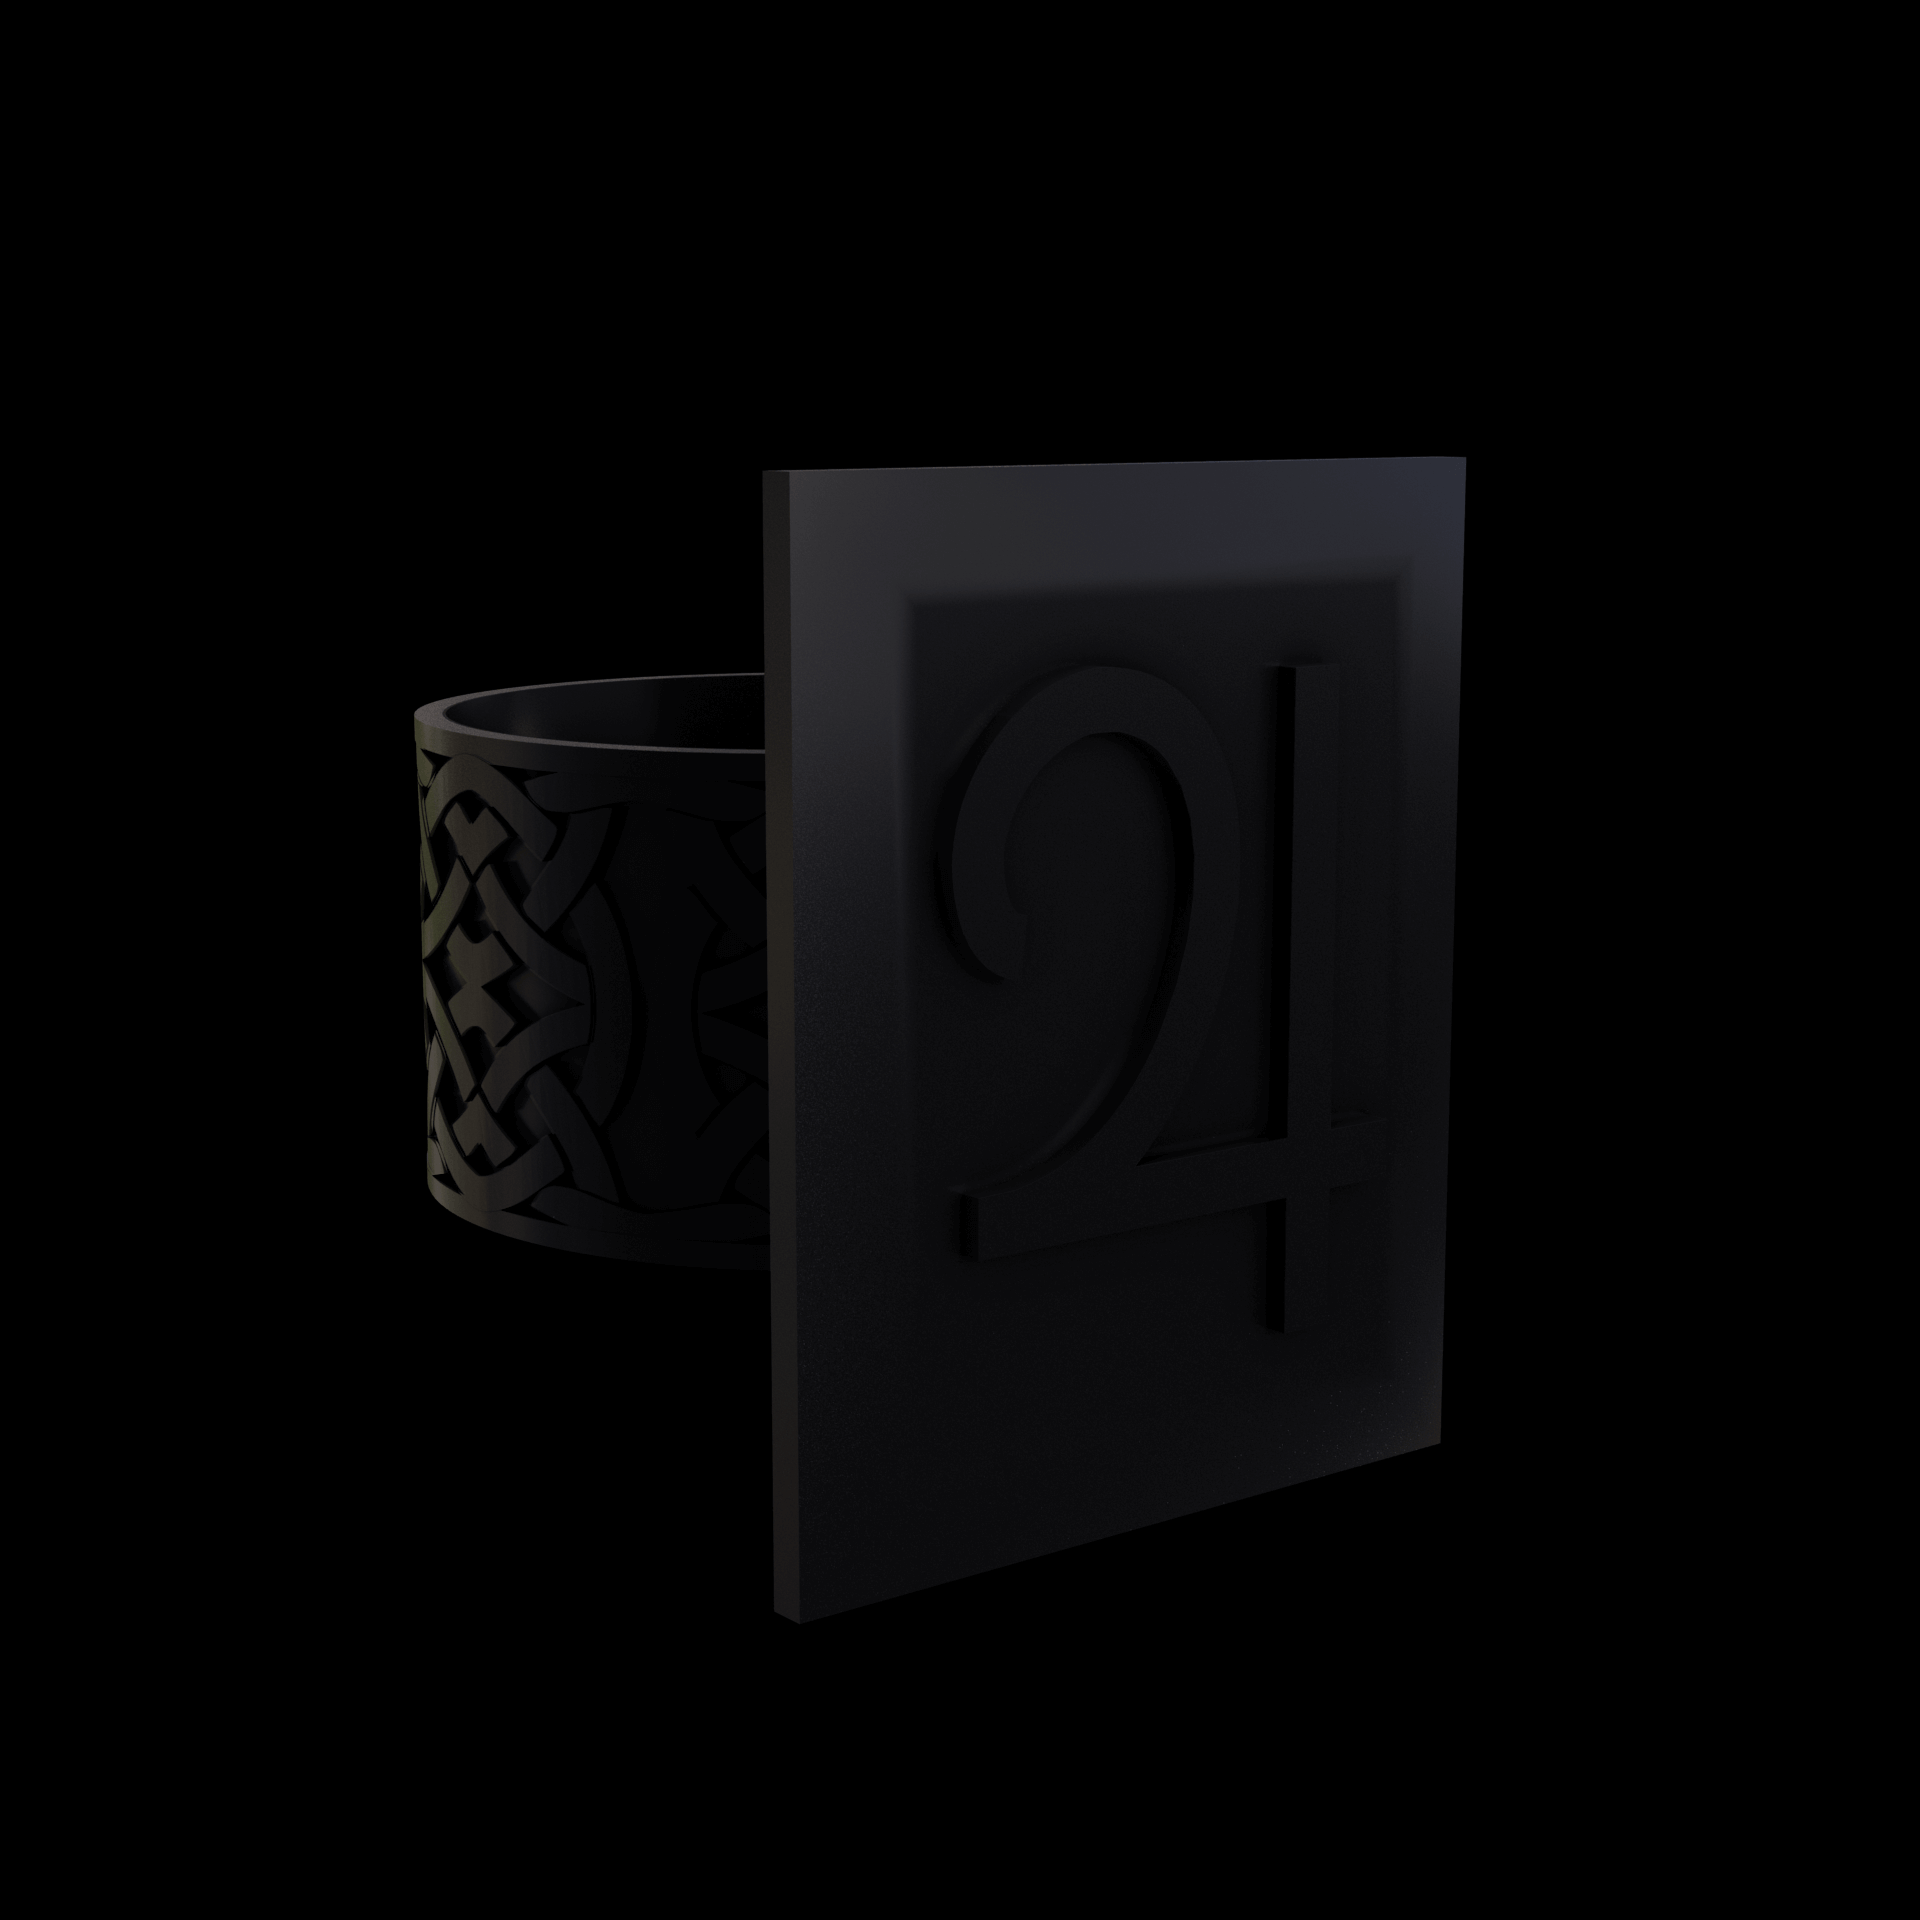 Bronze infused 420 stainless steel, manufactured using 3D printing, treated and polished for a dark grey sheen, with visible print lines.